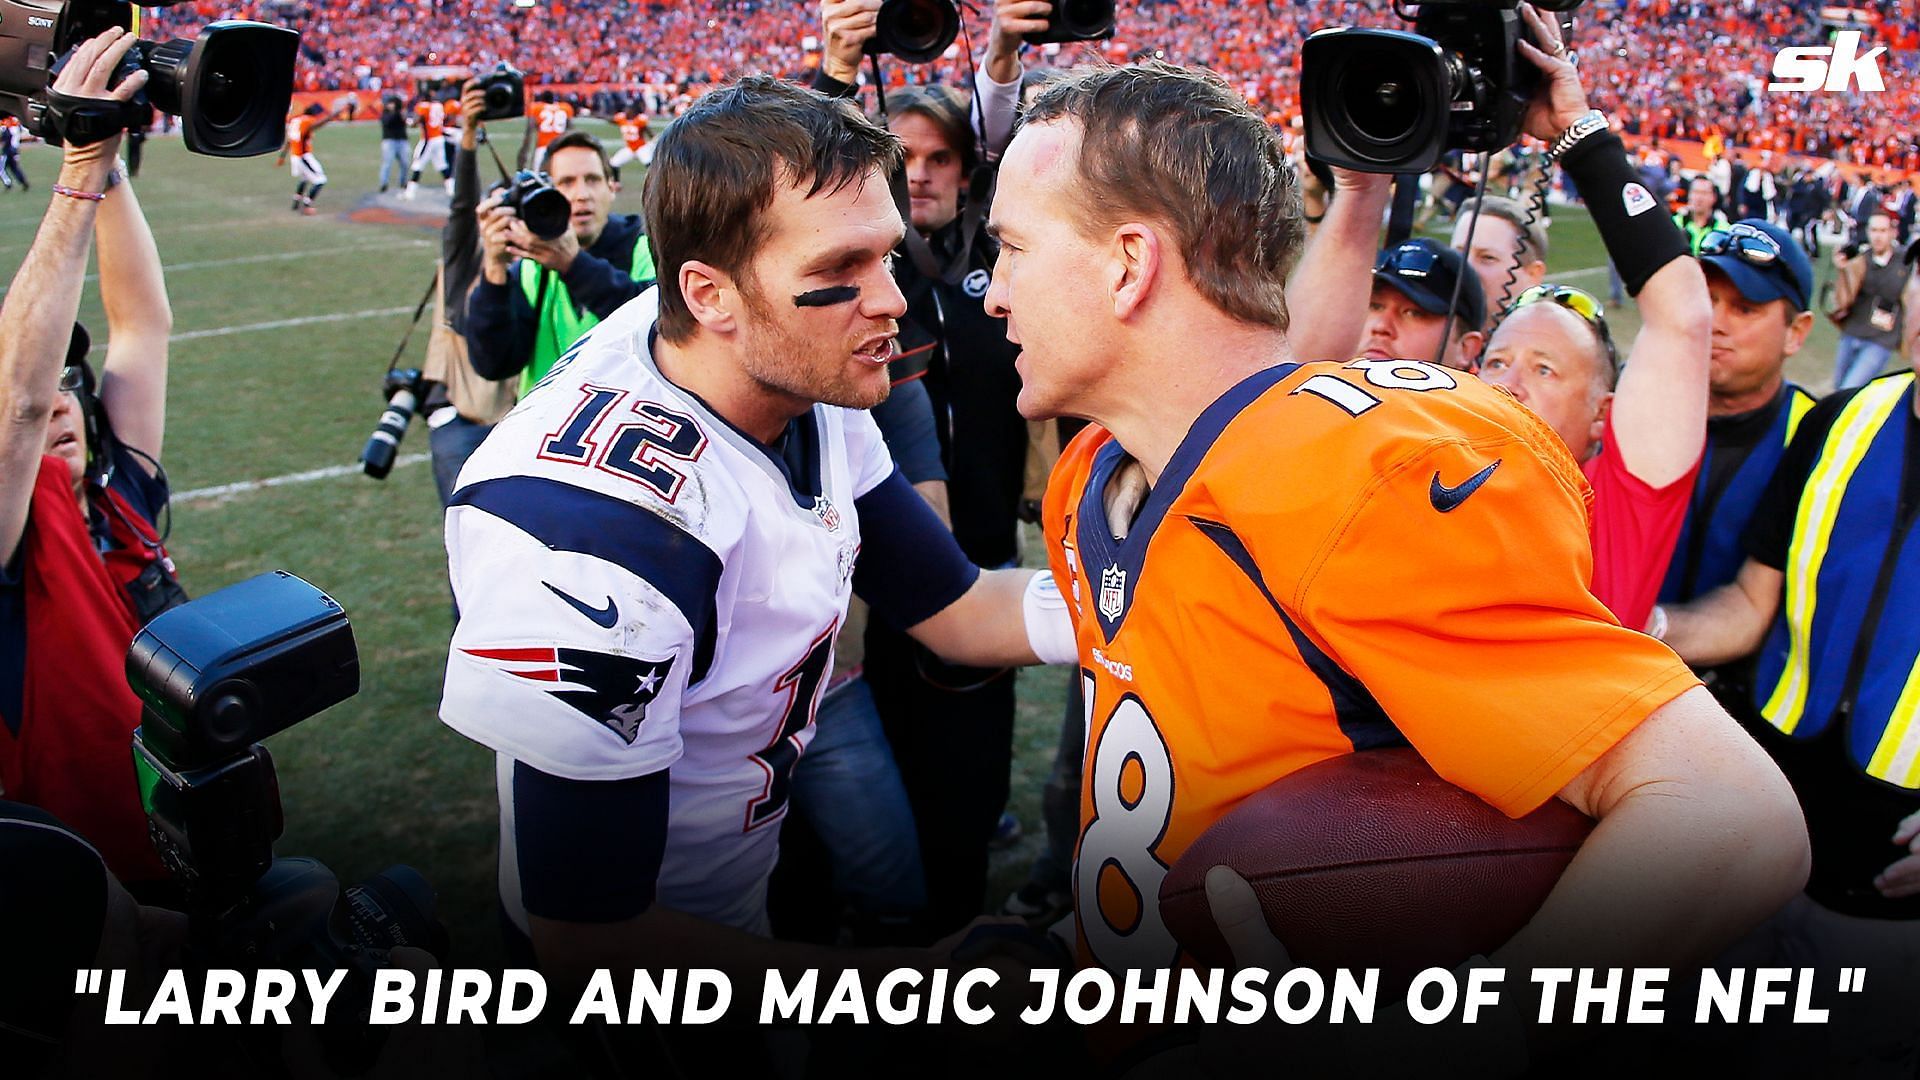 Tom Brady and Peyton Manning&#039;s rivalry was one of the biggest attractions in NFL